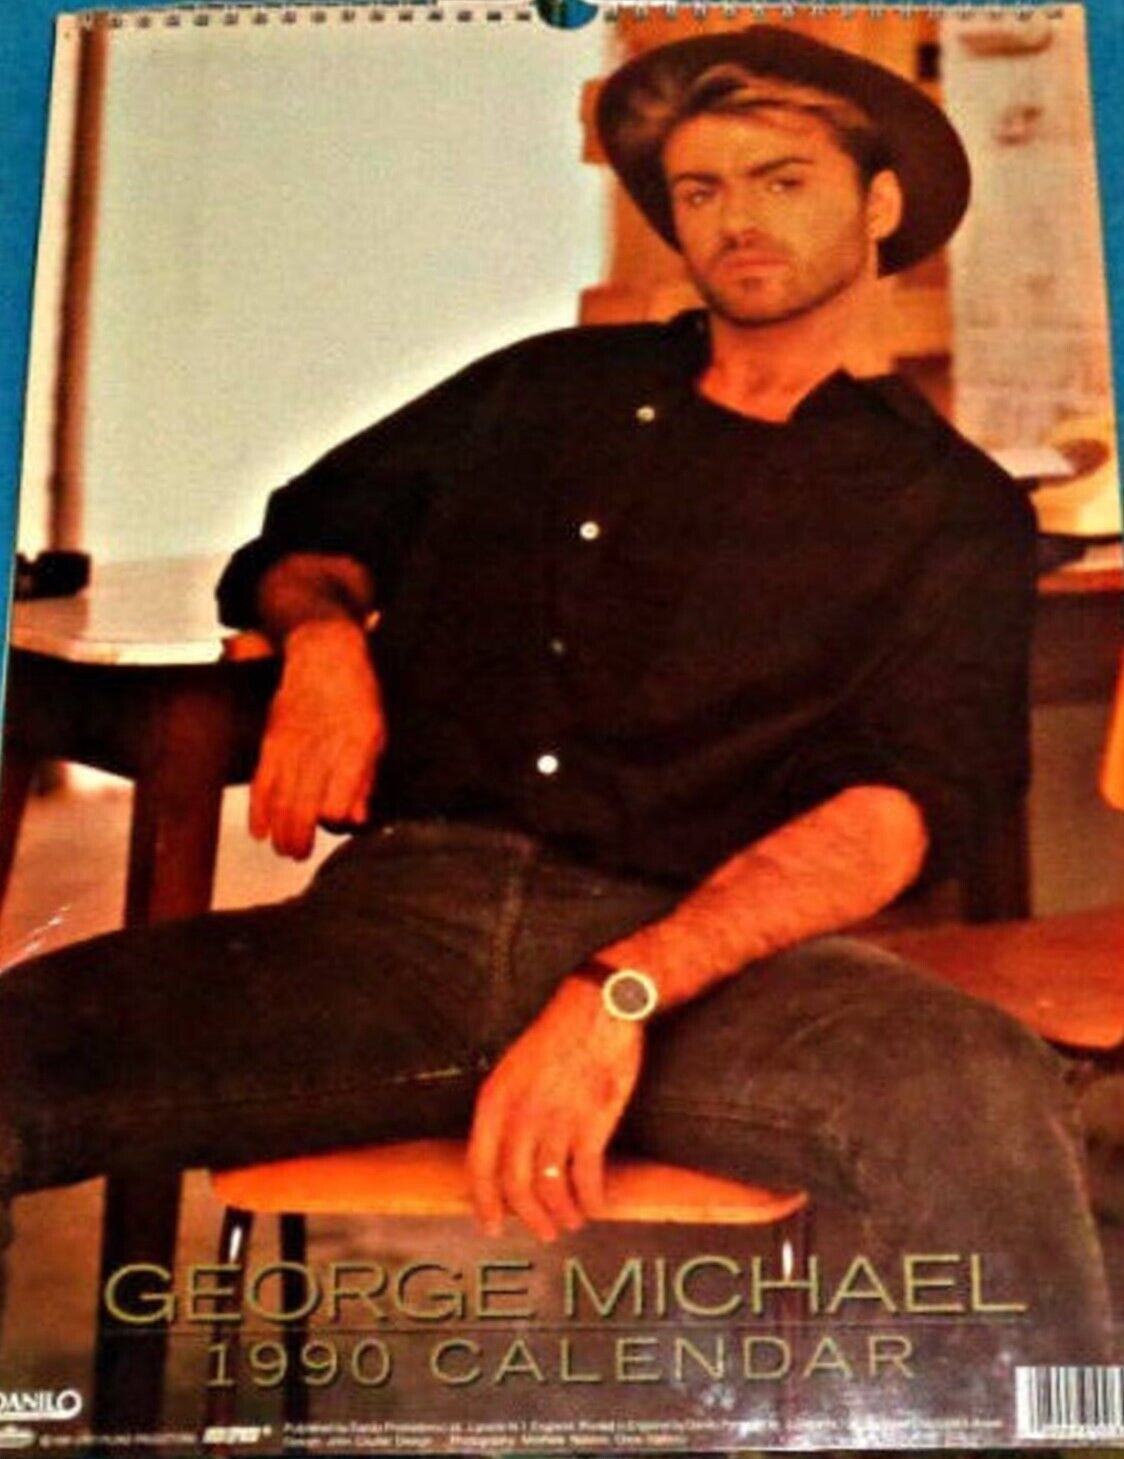 George Michael OFFICIAL 1990 CALENDAR, never used,  dates match 2018